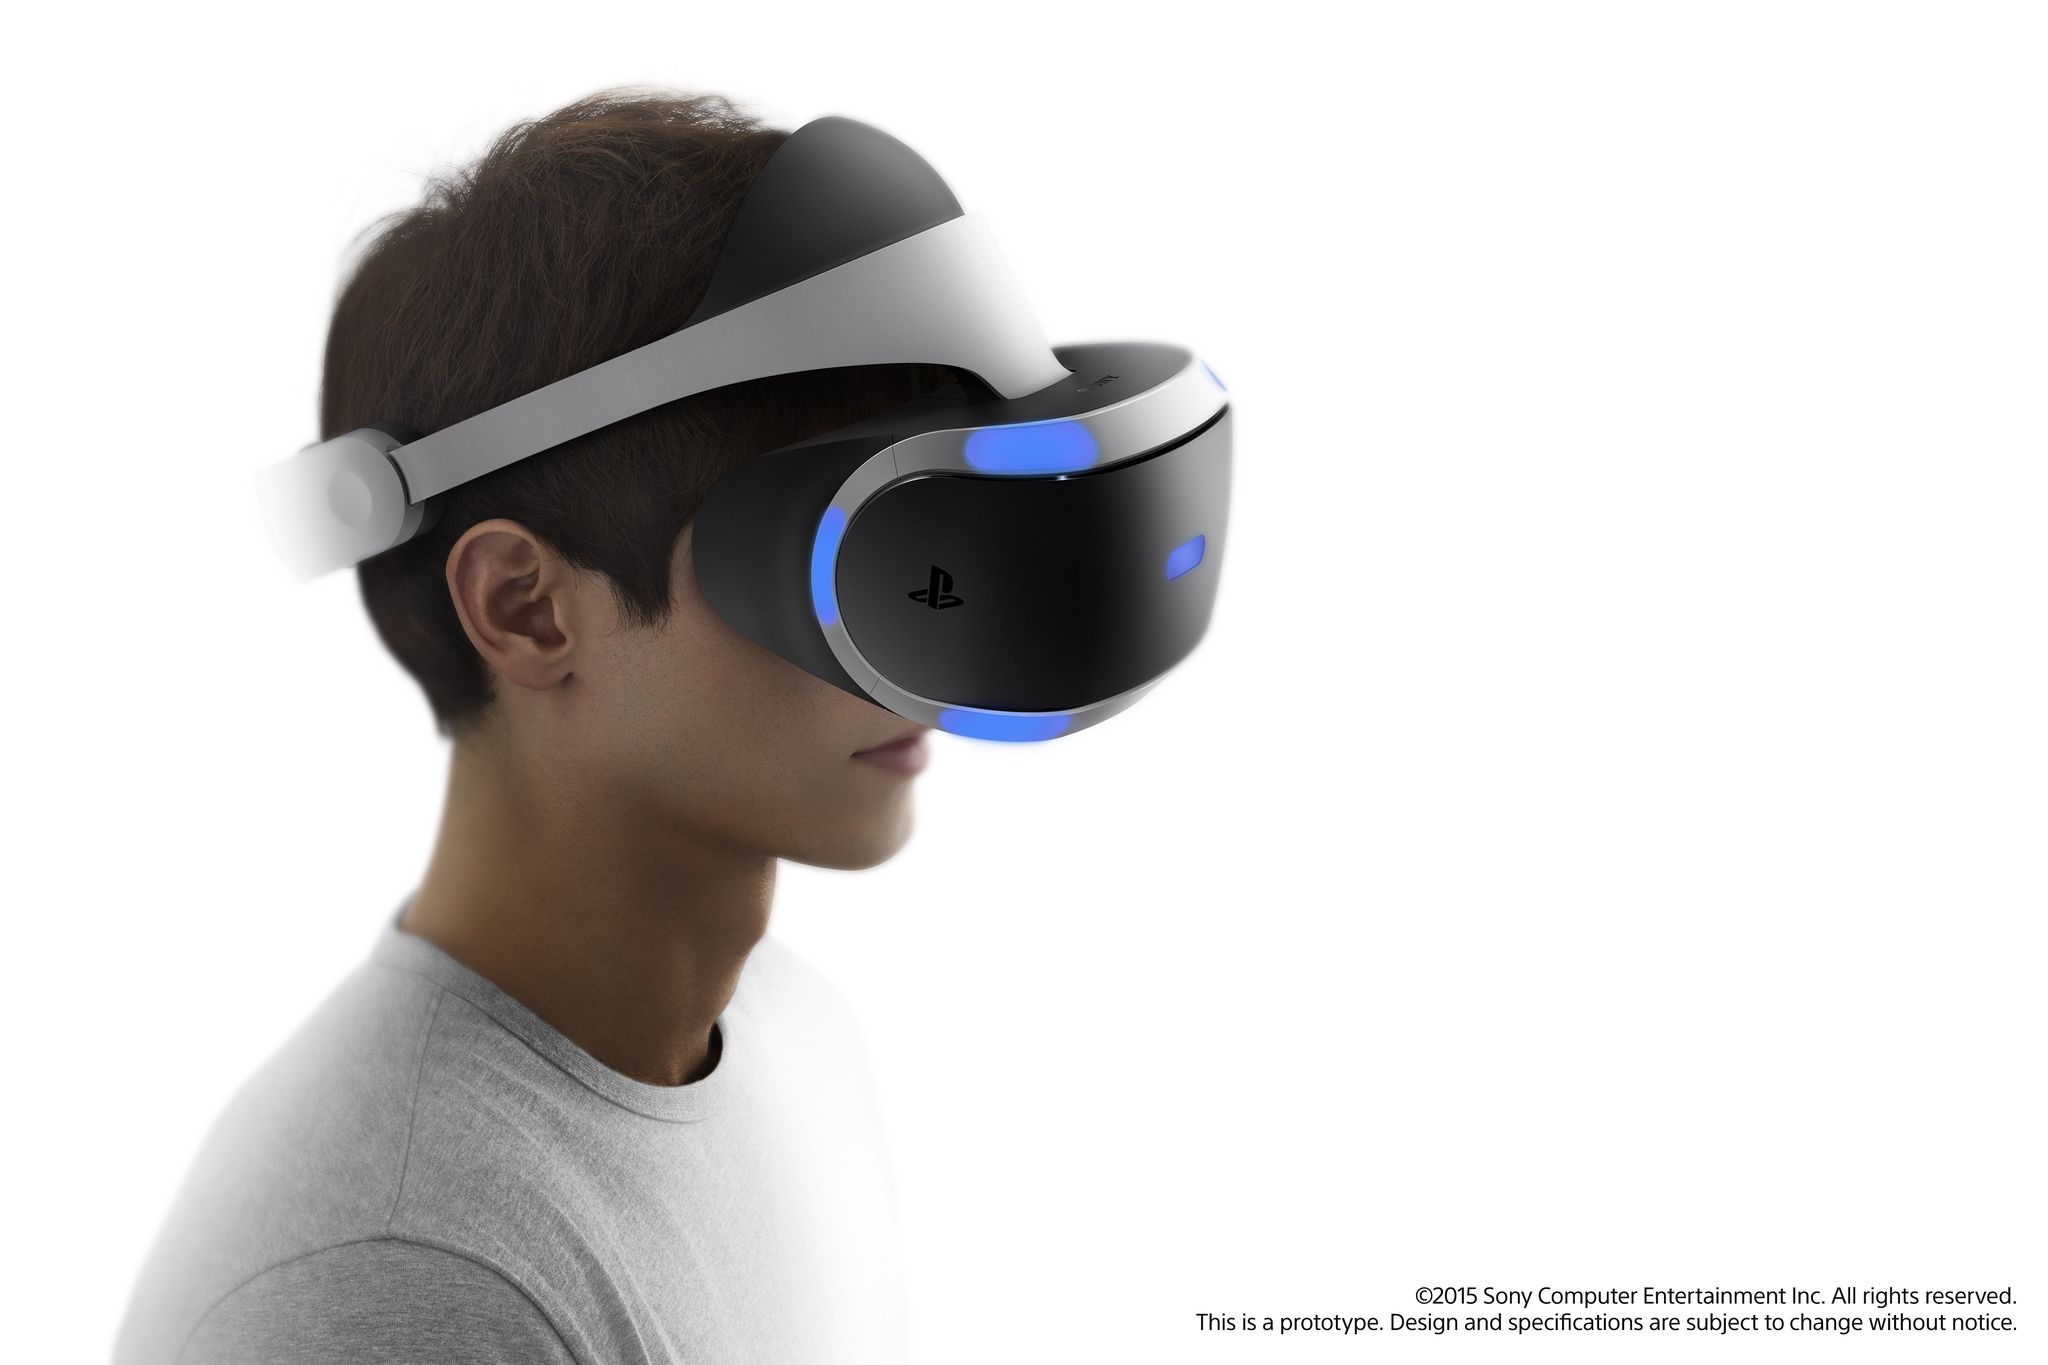 PlayStation 4 is set for virtual reality